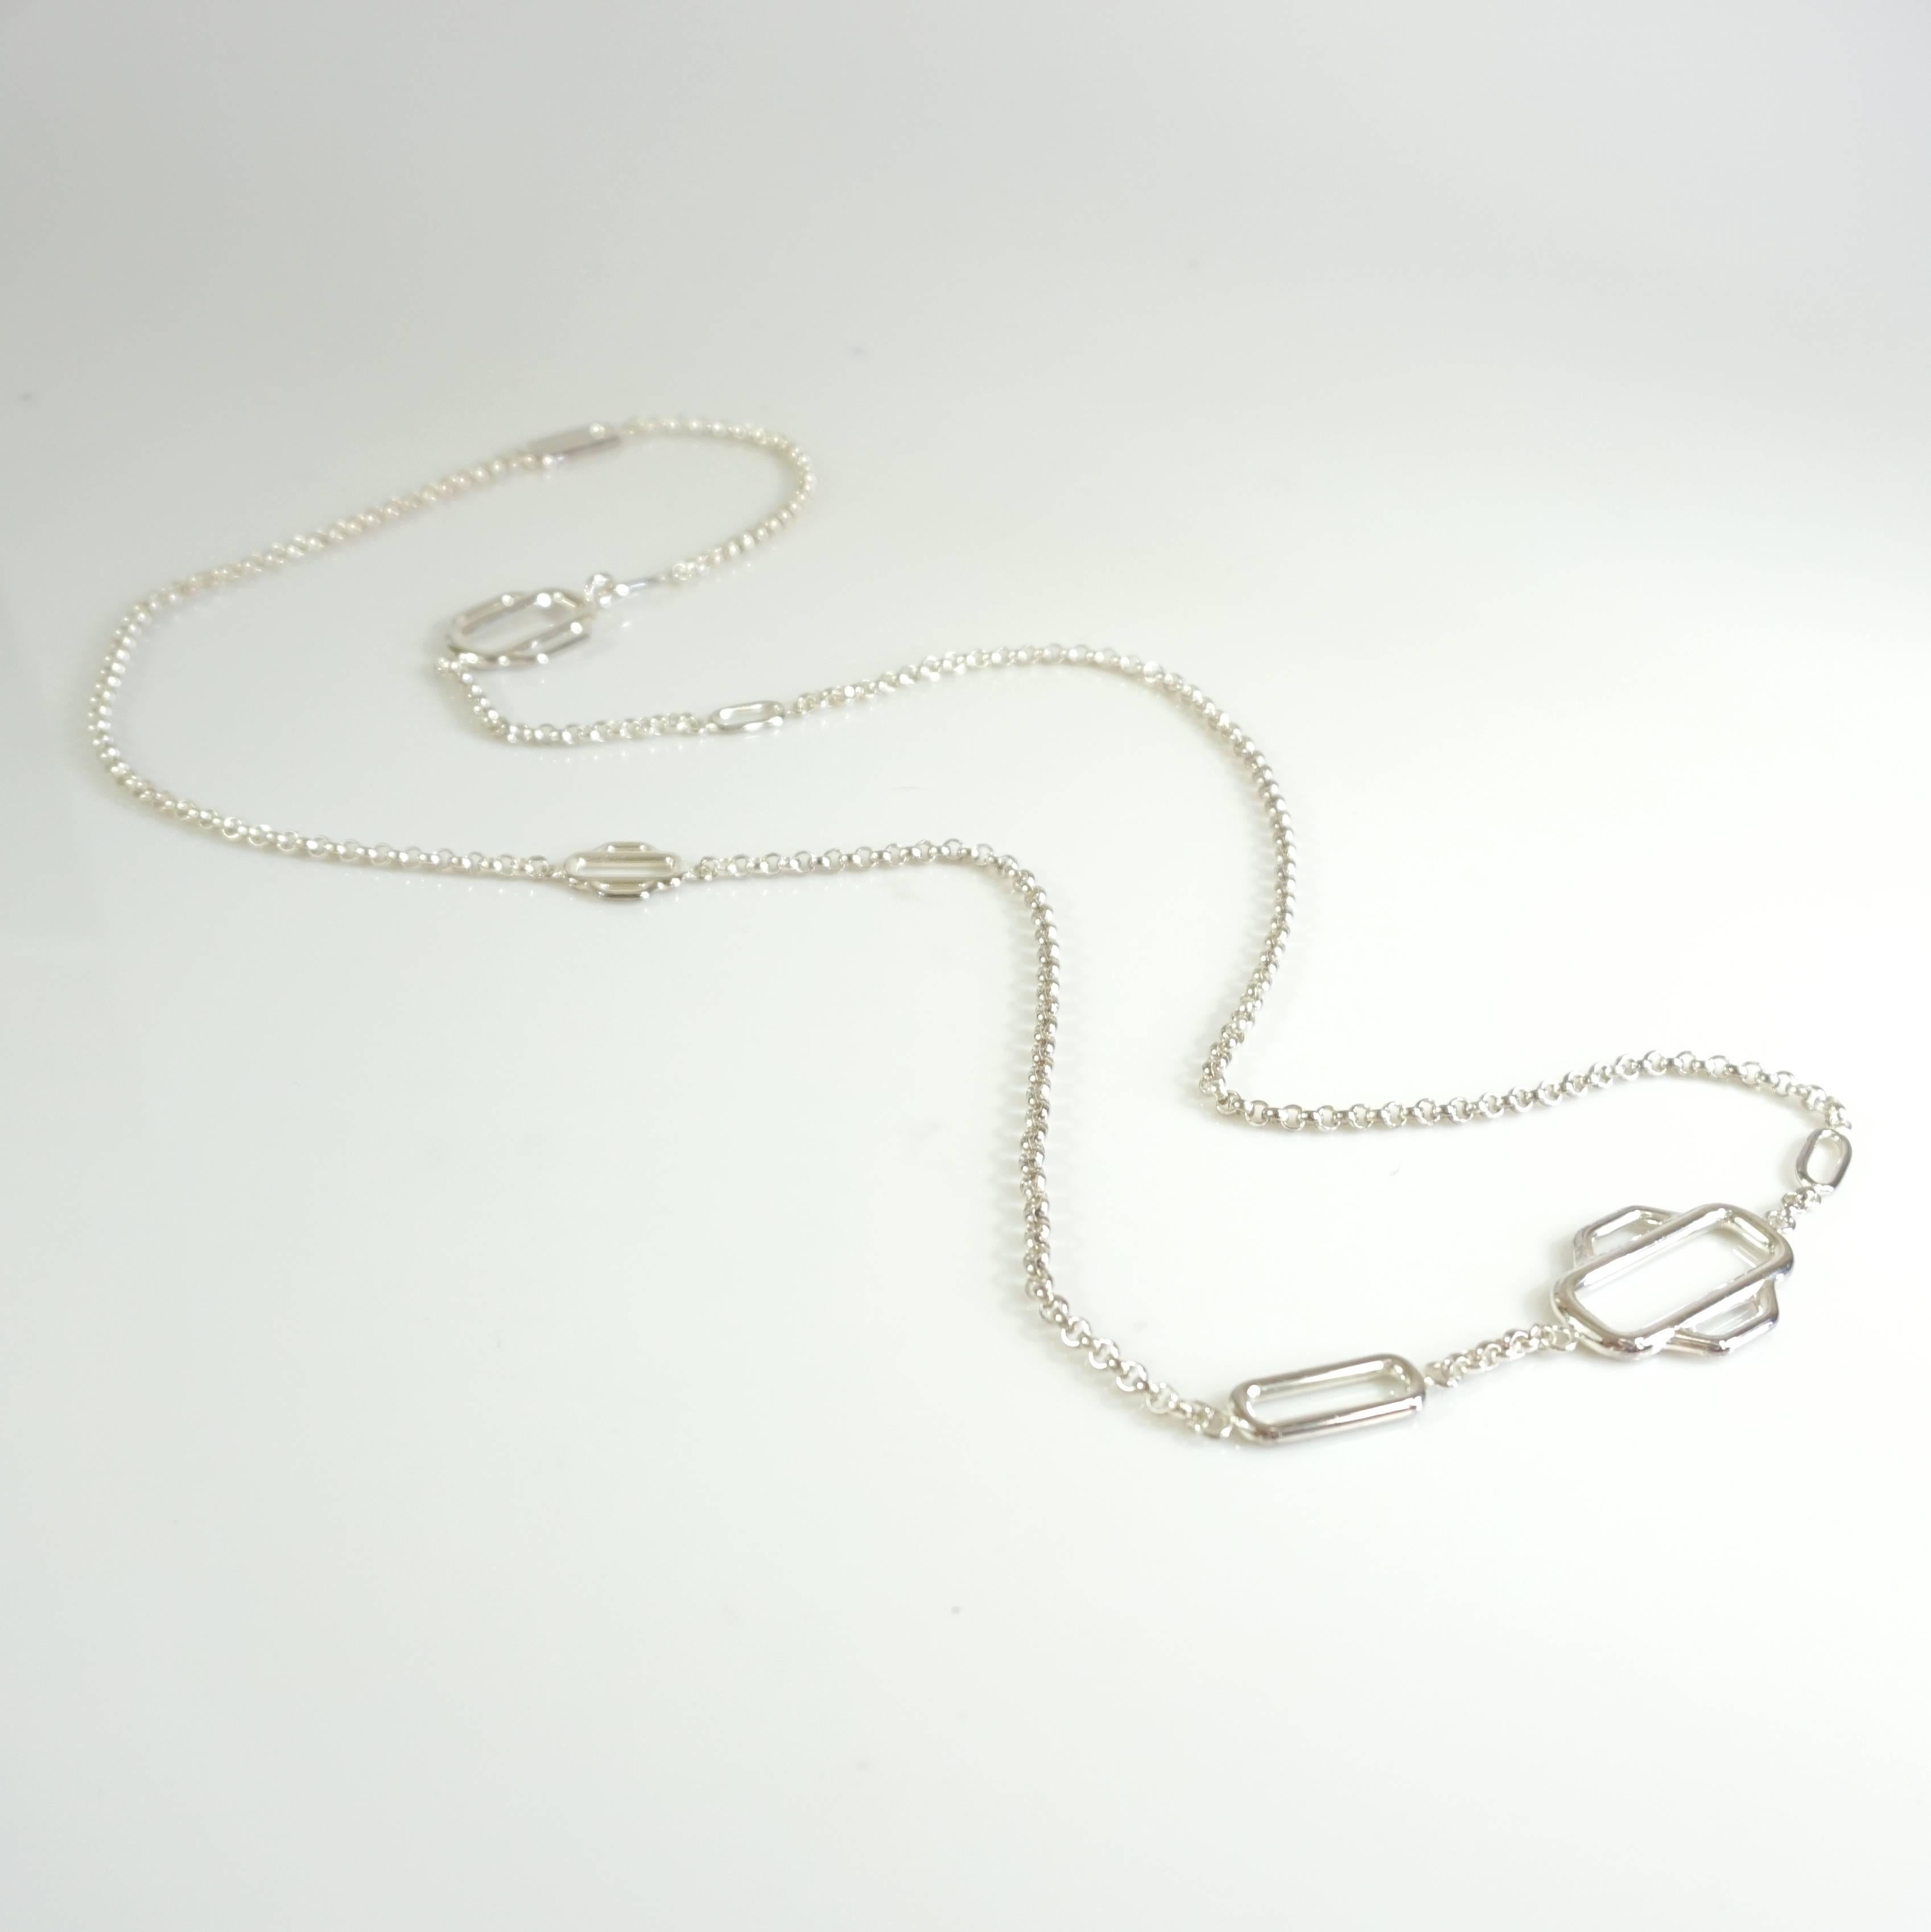 This Hermes drop necklace is very versatile and can be worn at various lengths. It is made of sterling silver and has various equestrian harness style links. The piece is in excellent condition with very minimal wear to the silver (see the last